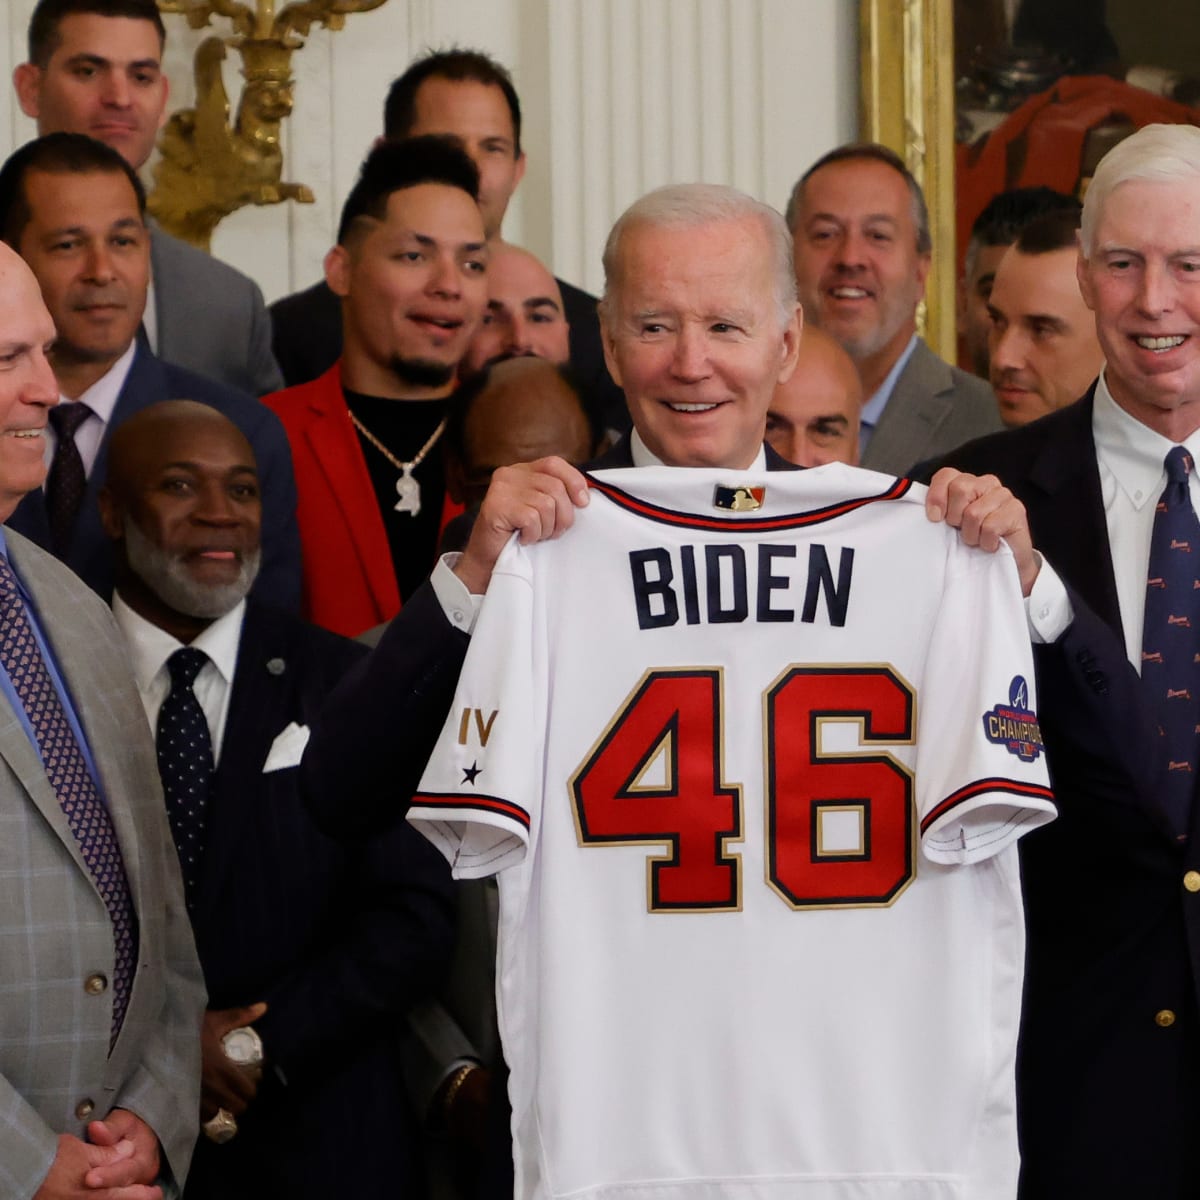 What did President Biden say about the Atlanta Braves' tomahawk